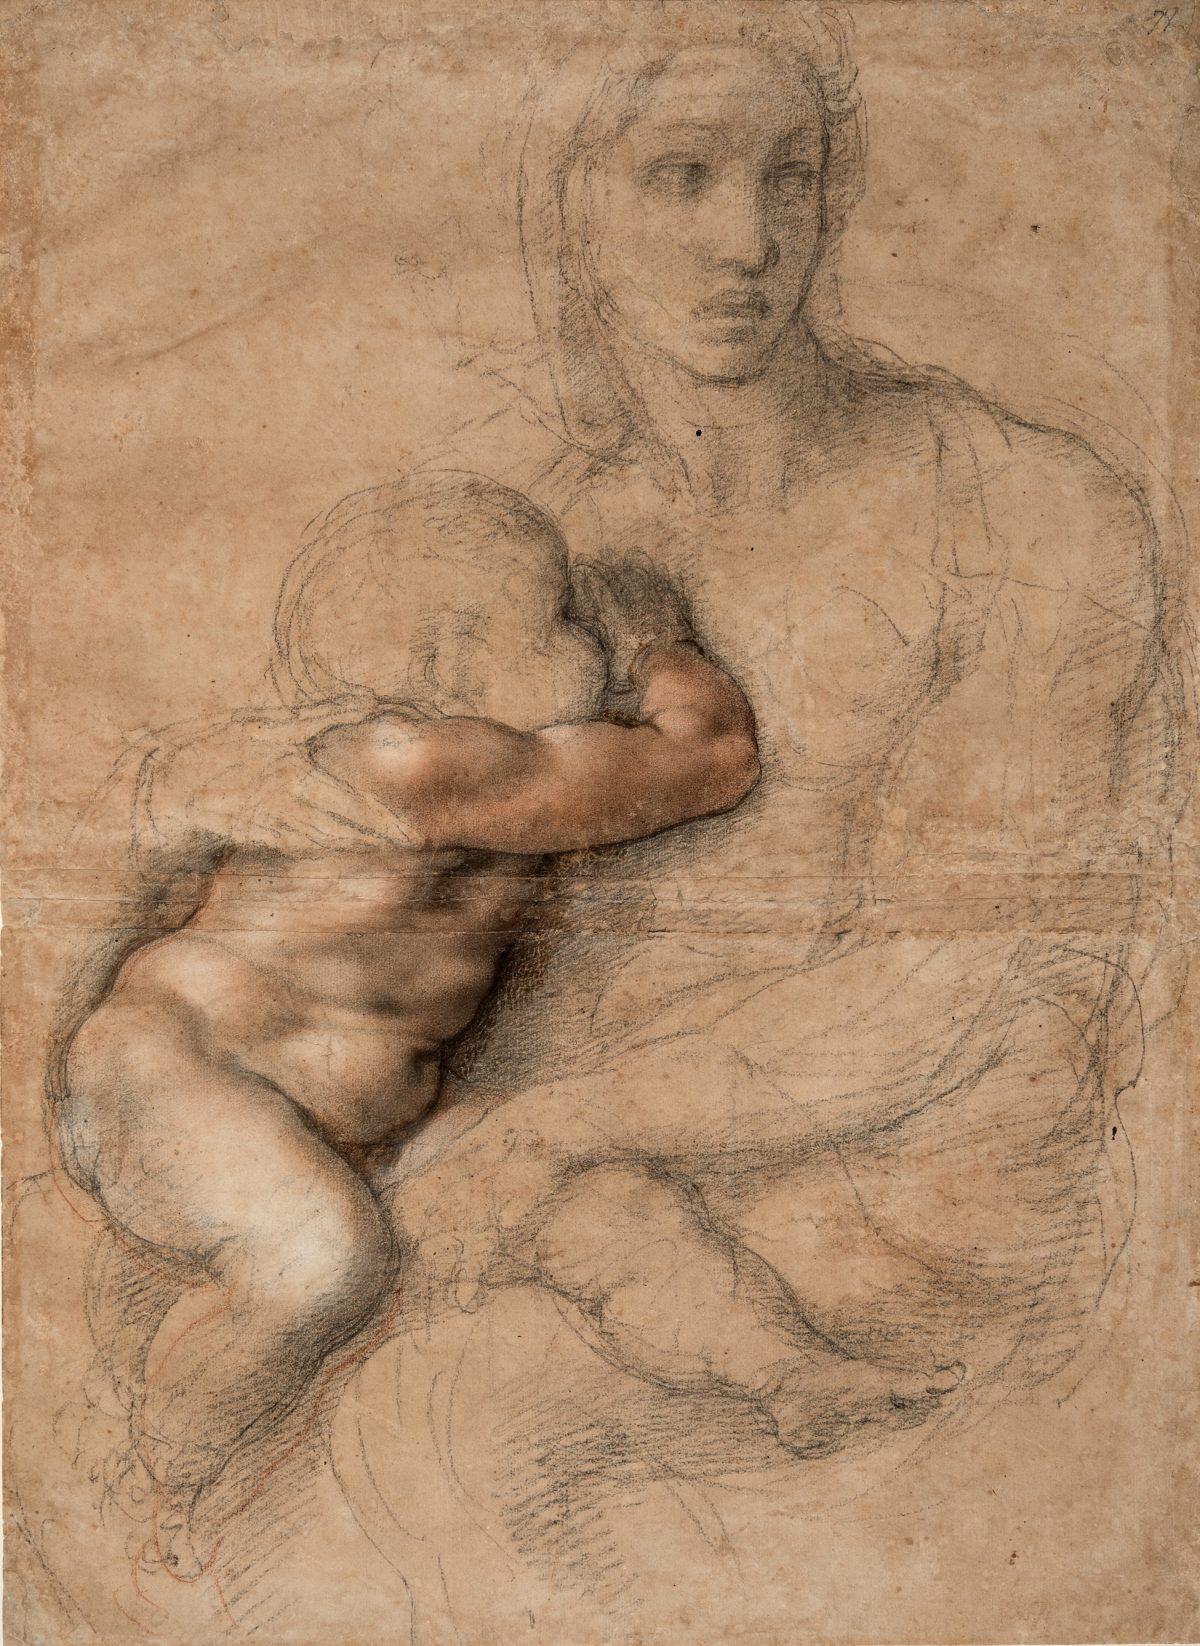 Unfinished Cartoon for a Madonna and Child, 1525–1530, by Michelangelo Buonarroti (Italian, Caprese 1475–1564 Rome). Drawing, black and red chalk, white gouache, brush and brown wash. 21 5/16 inches by 15 9/16 inches. (Casa Buonarroti, Florence)